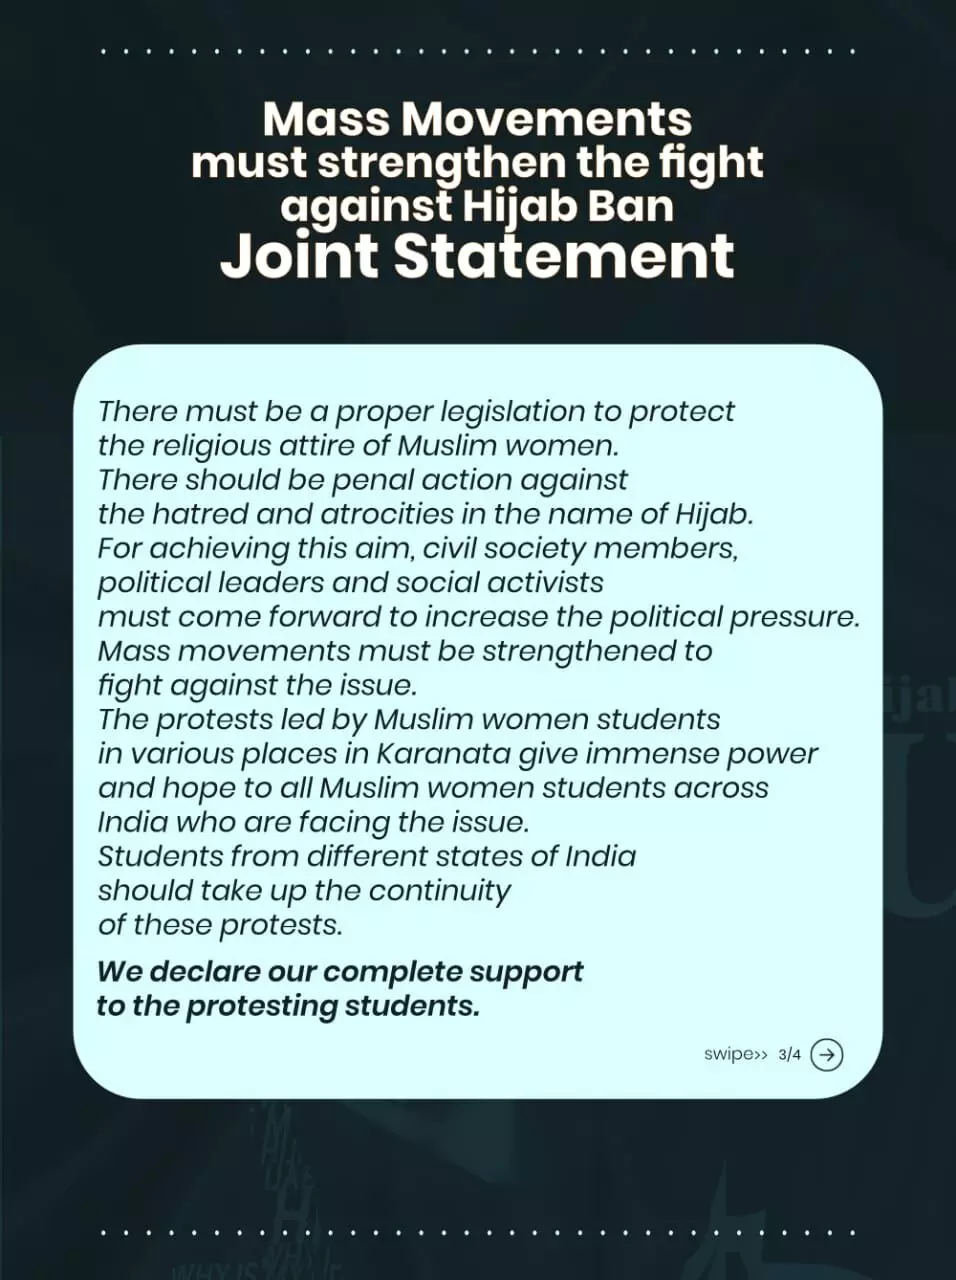 Women leaders and social activists in Kerala release statement against hijab ban